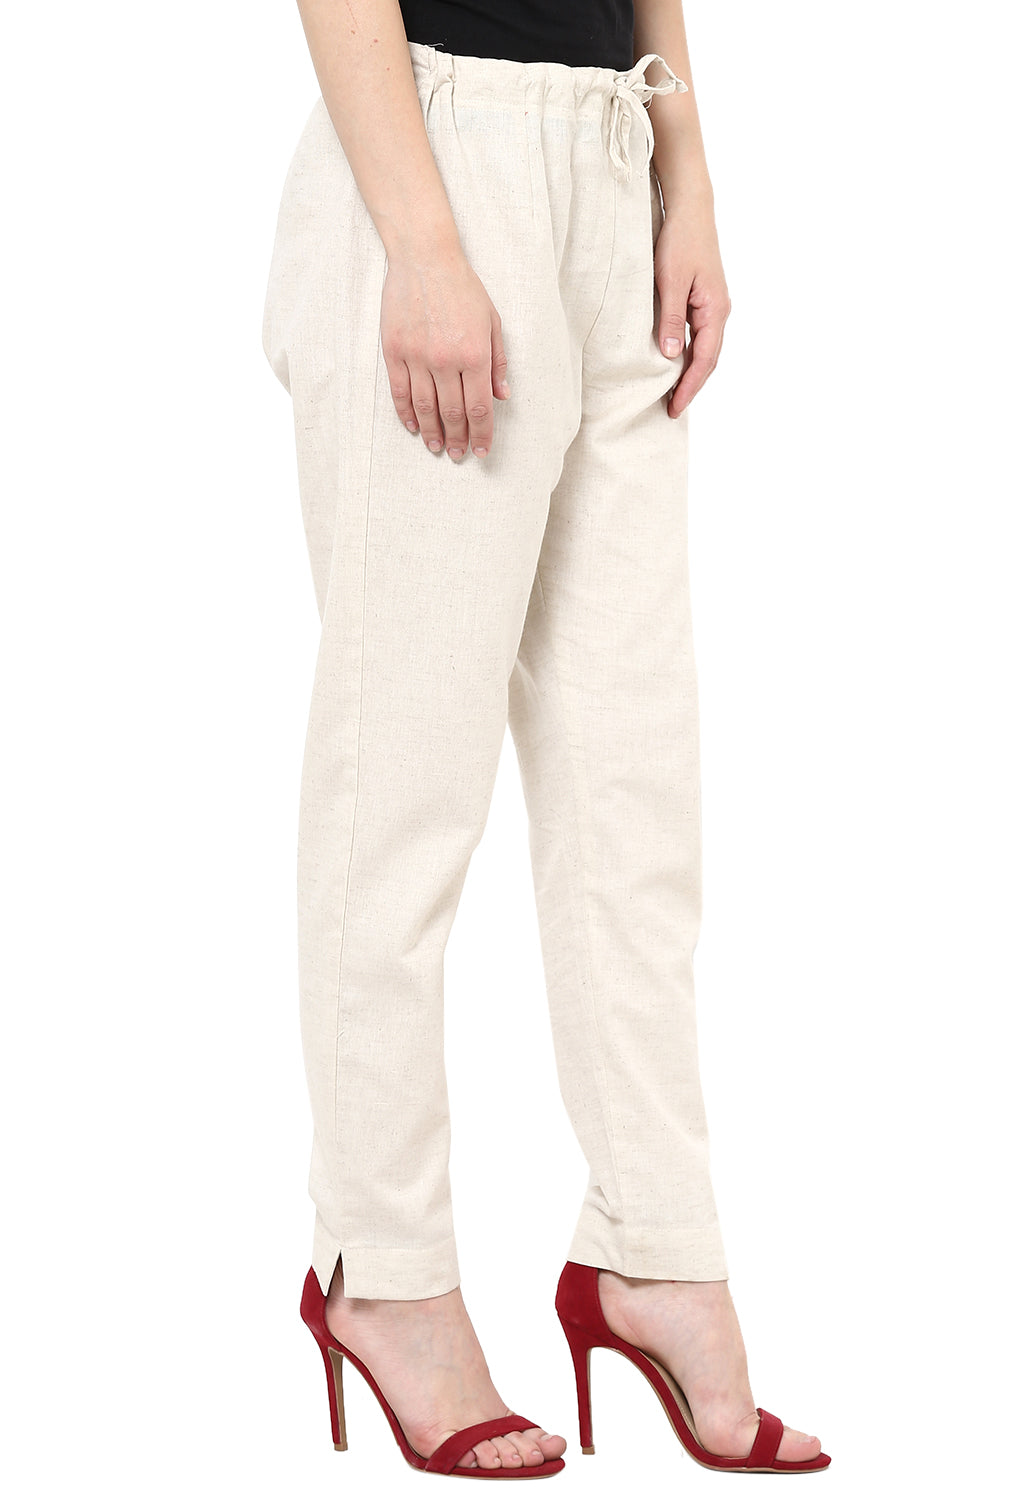 MINC Petite  Buy Girls Trousers in OffWhite Cotton Linen Online